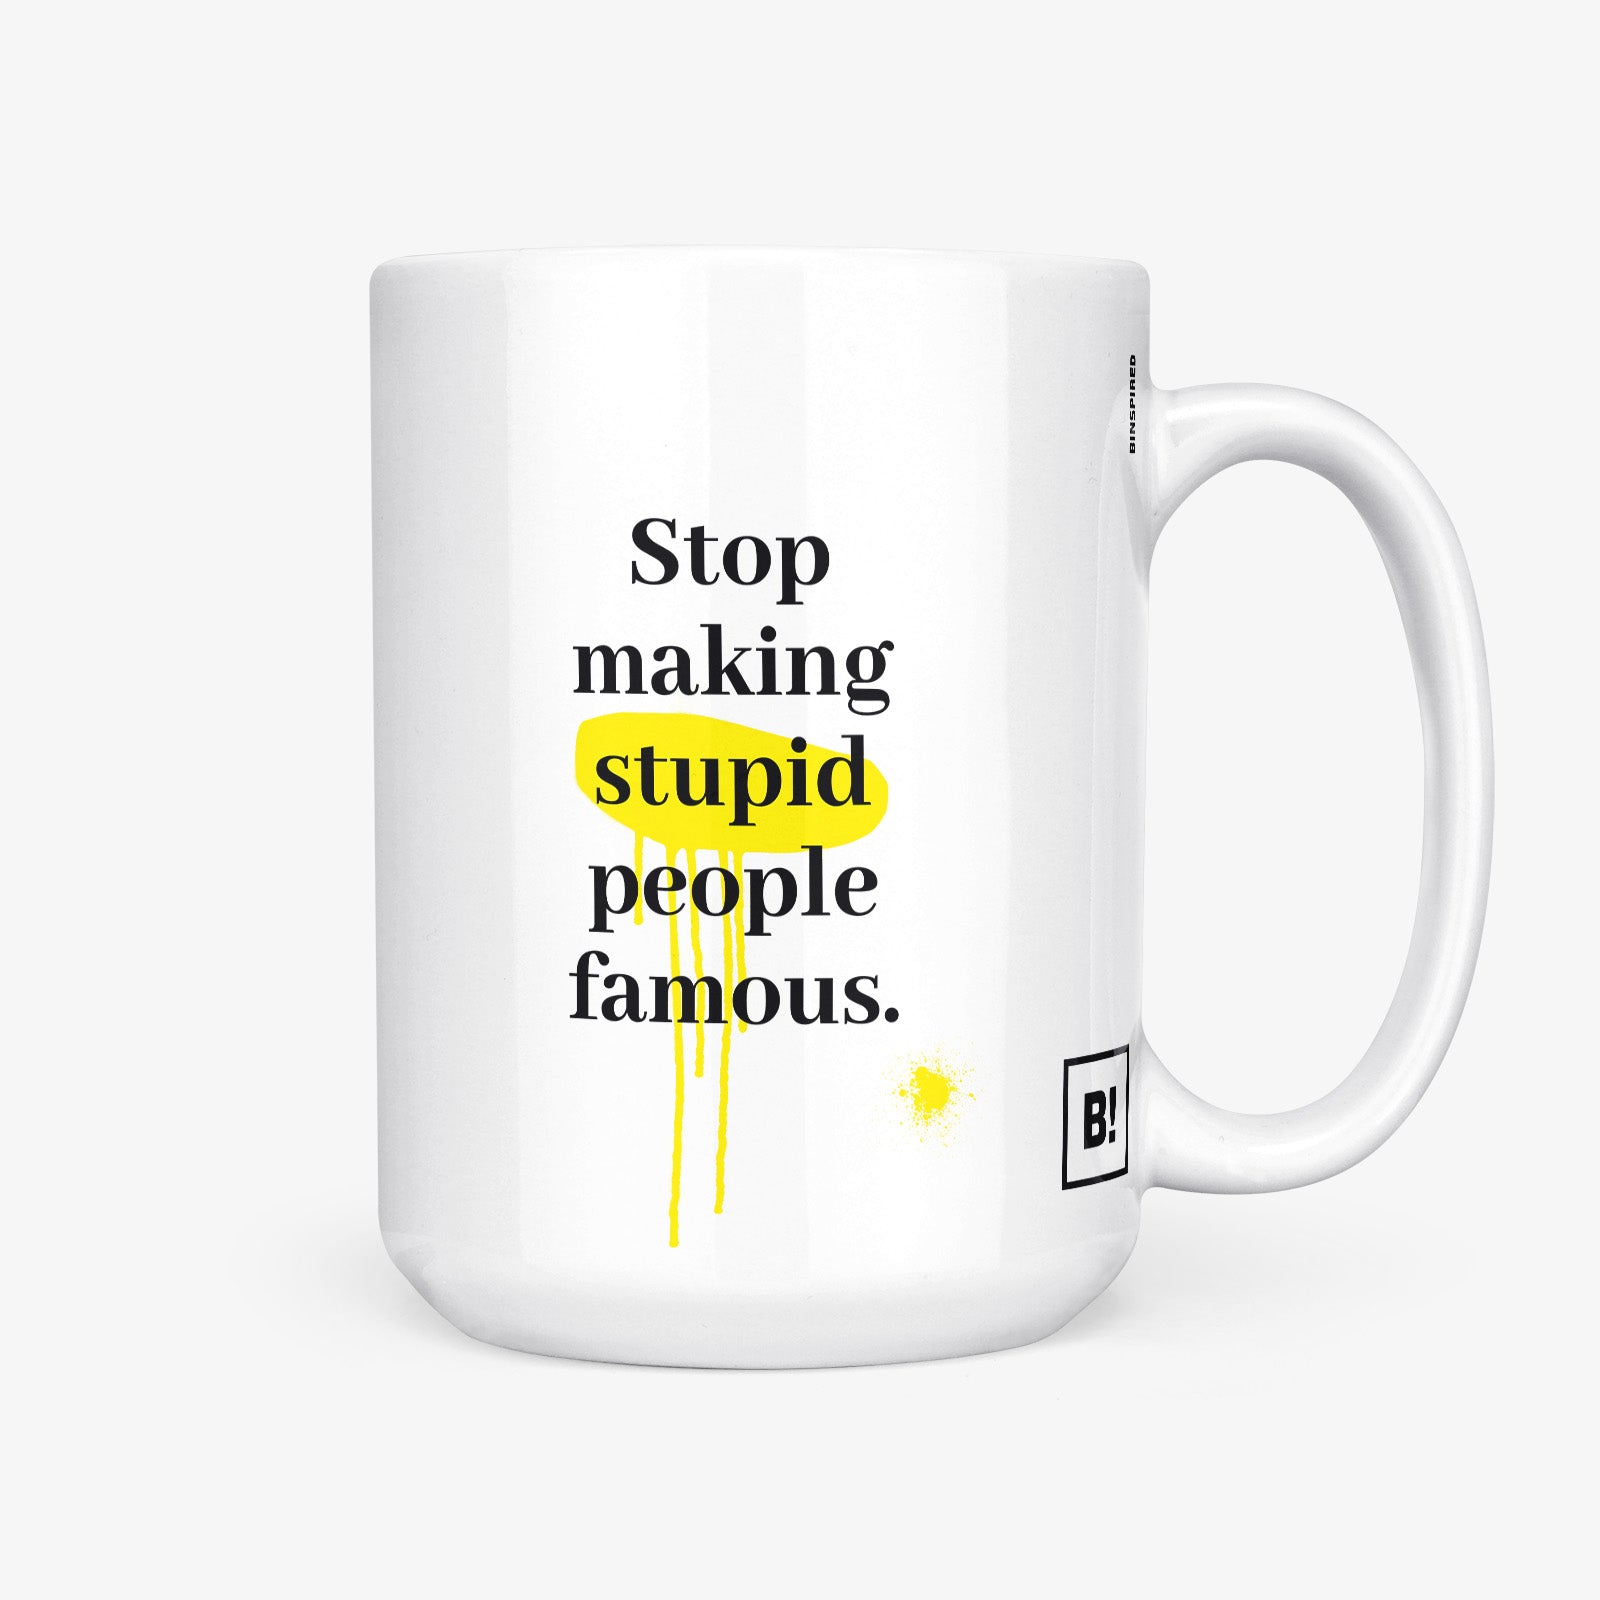 Get inspired by the quote, "Stop Making Stupid People Famous" on this 15oz white glossy coffee mug with the handle on the right.